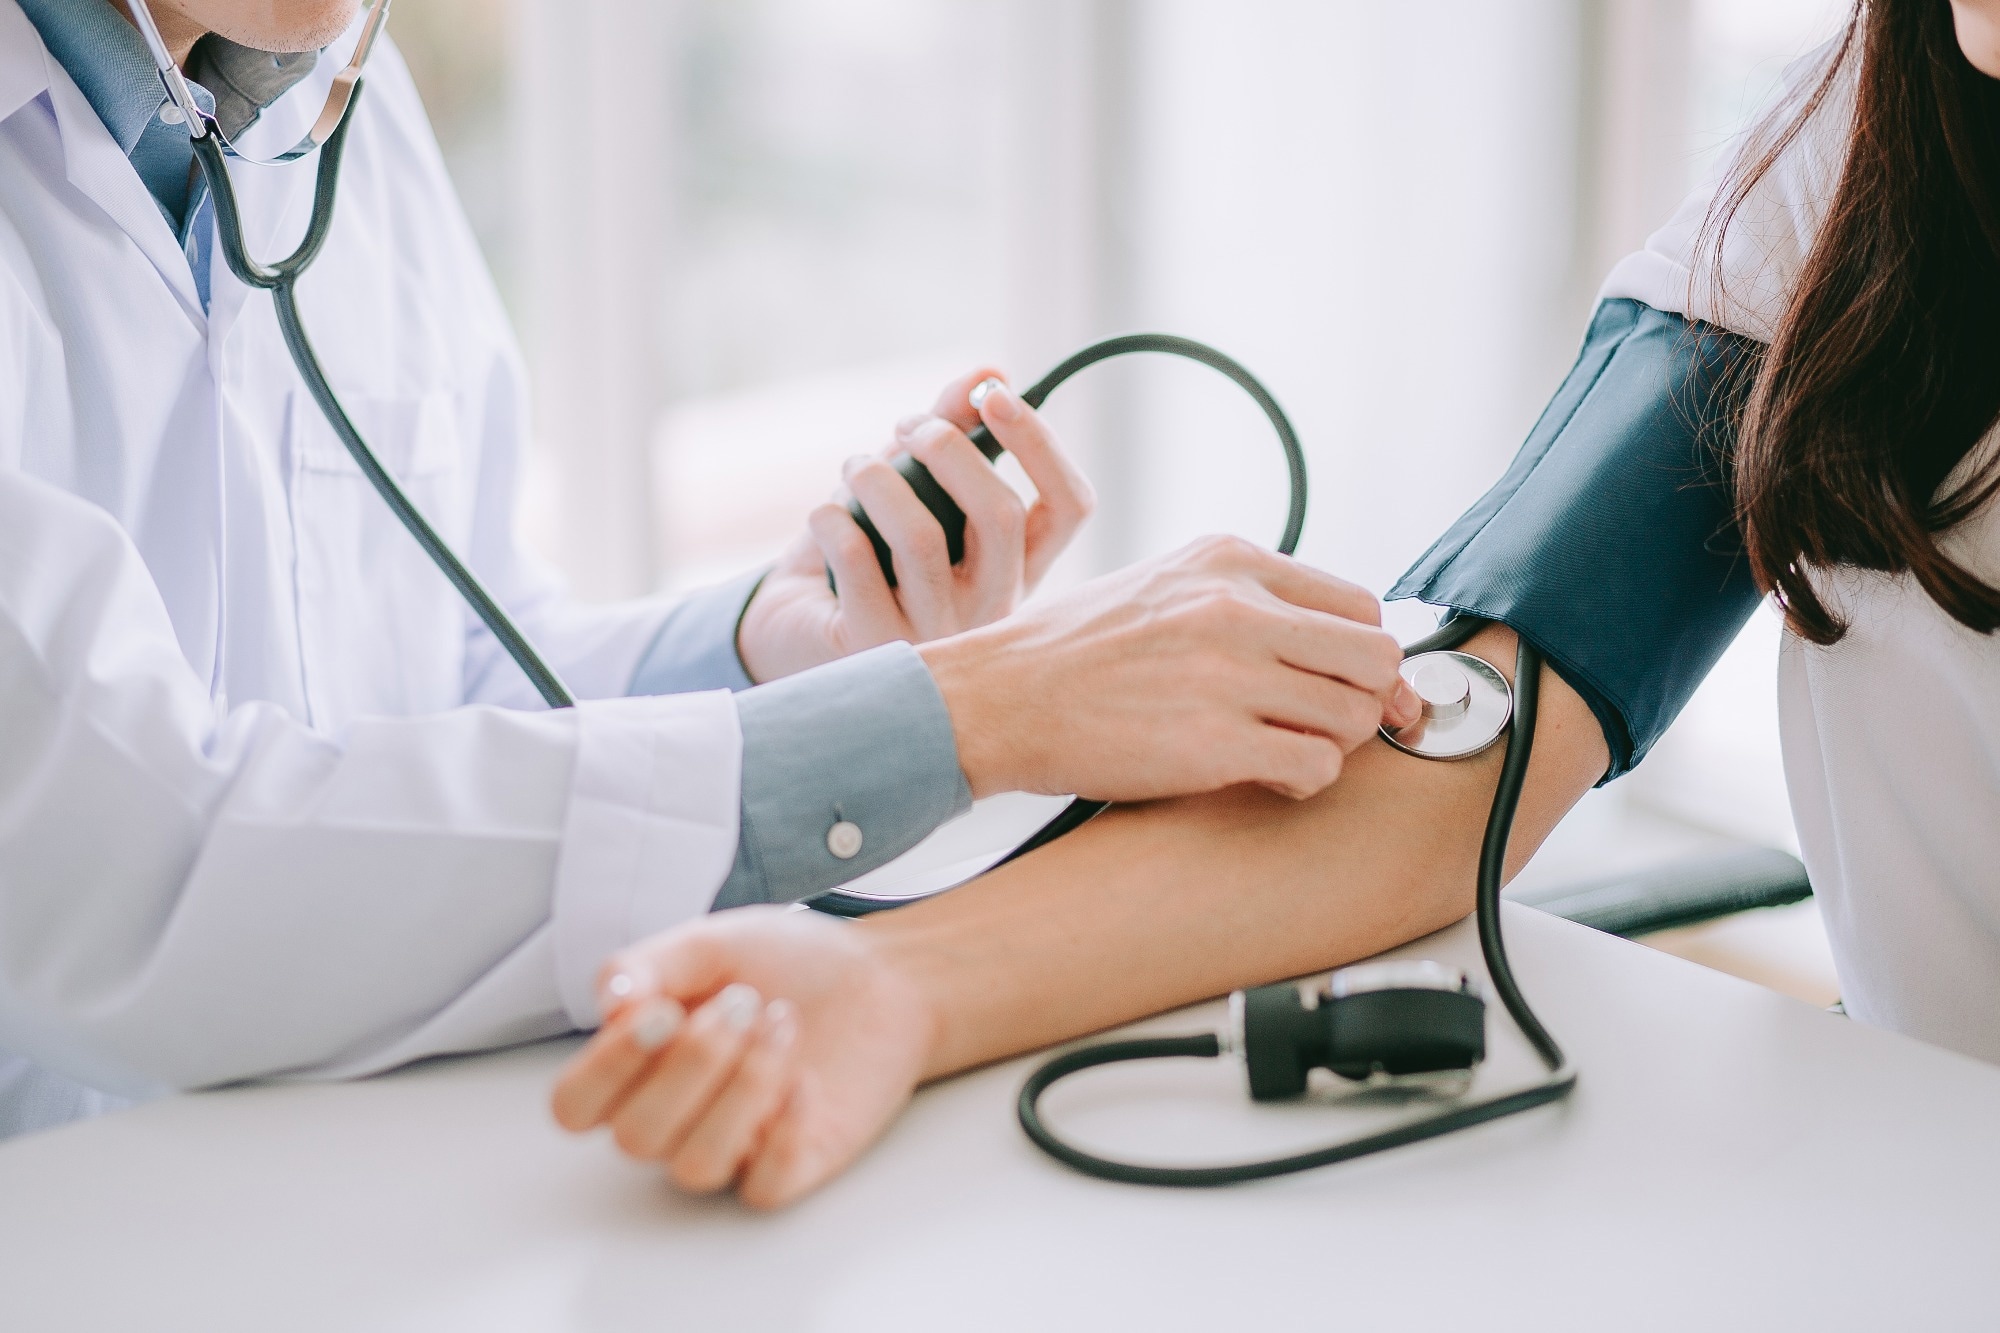 Study: New-Onset Diabetes Mellitus, Hypertension, Dyslipidaemia as Sequelae of COVID-19 Infection—Systematic Review. Image Credit: Chompoo Suriyo/Shutterstock